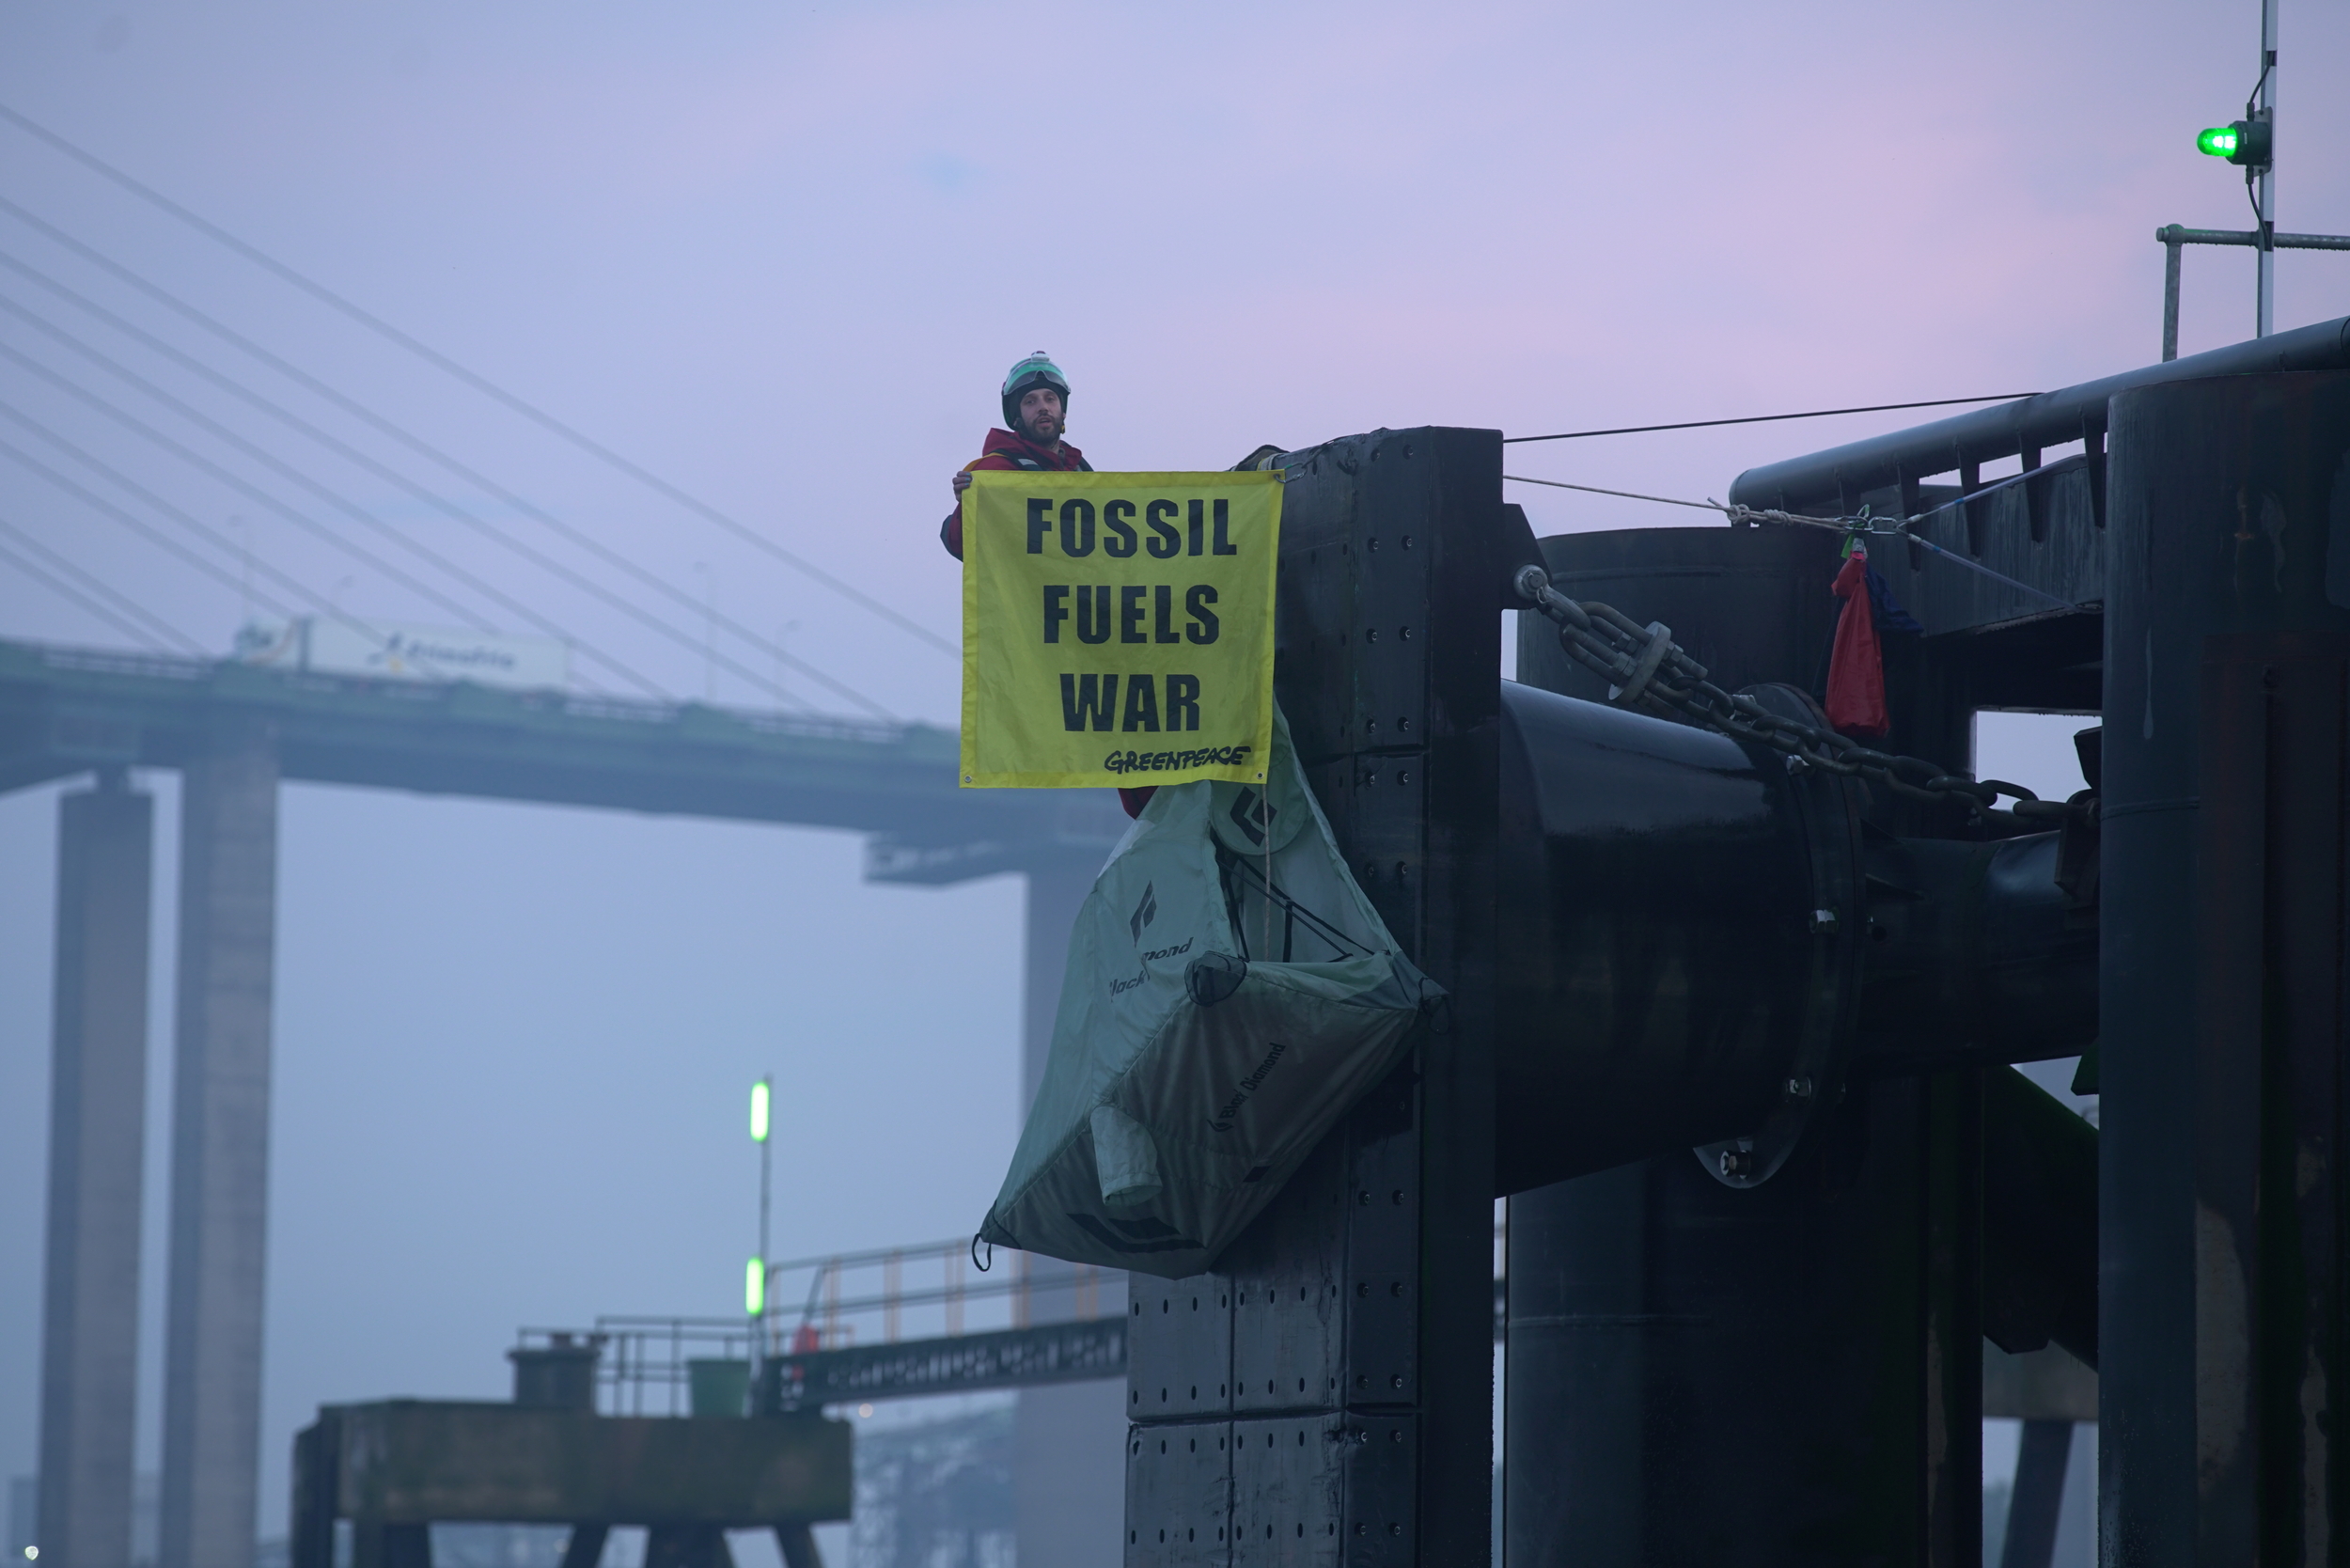 A climber hanging on a large metal structure holds a yellow banner reader 'Fossil Fuels War', in the misty background there is a suspension bridge.